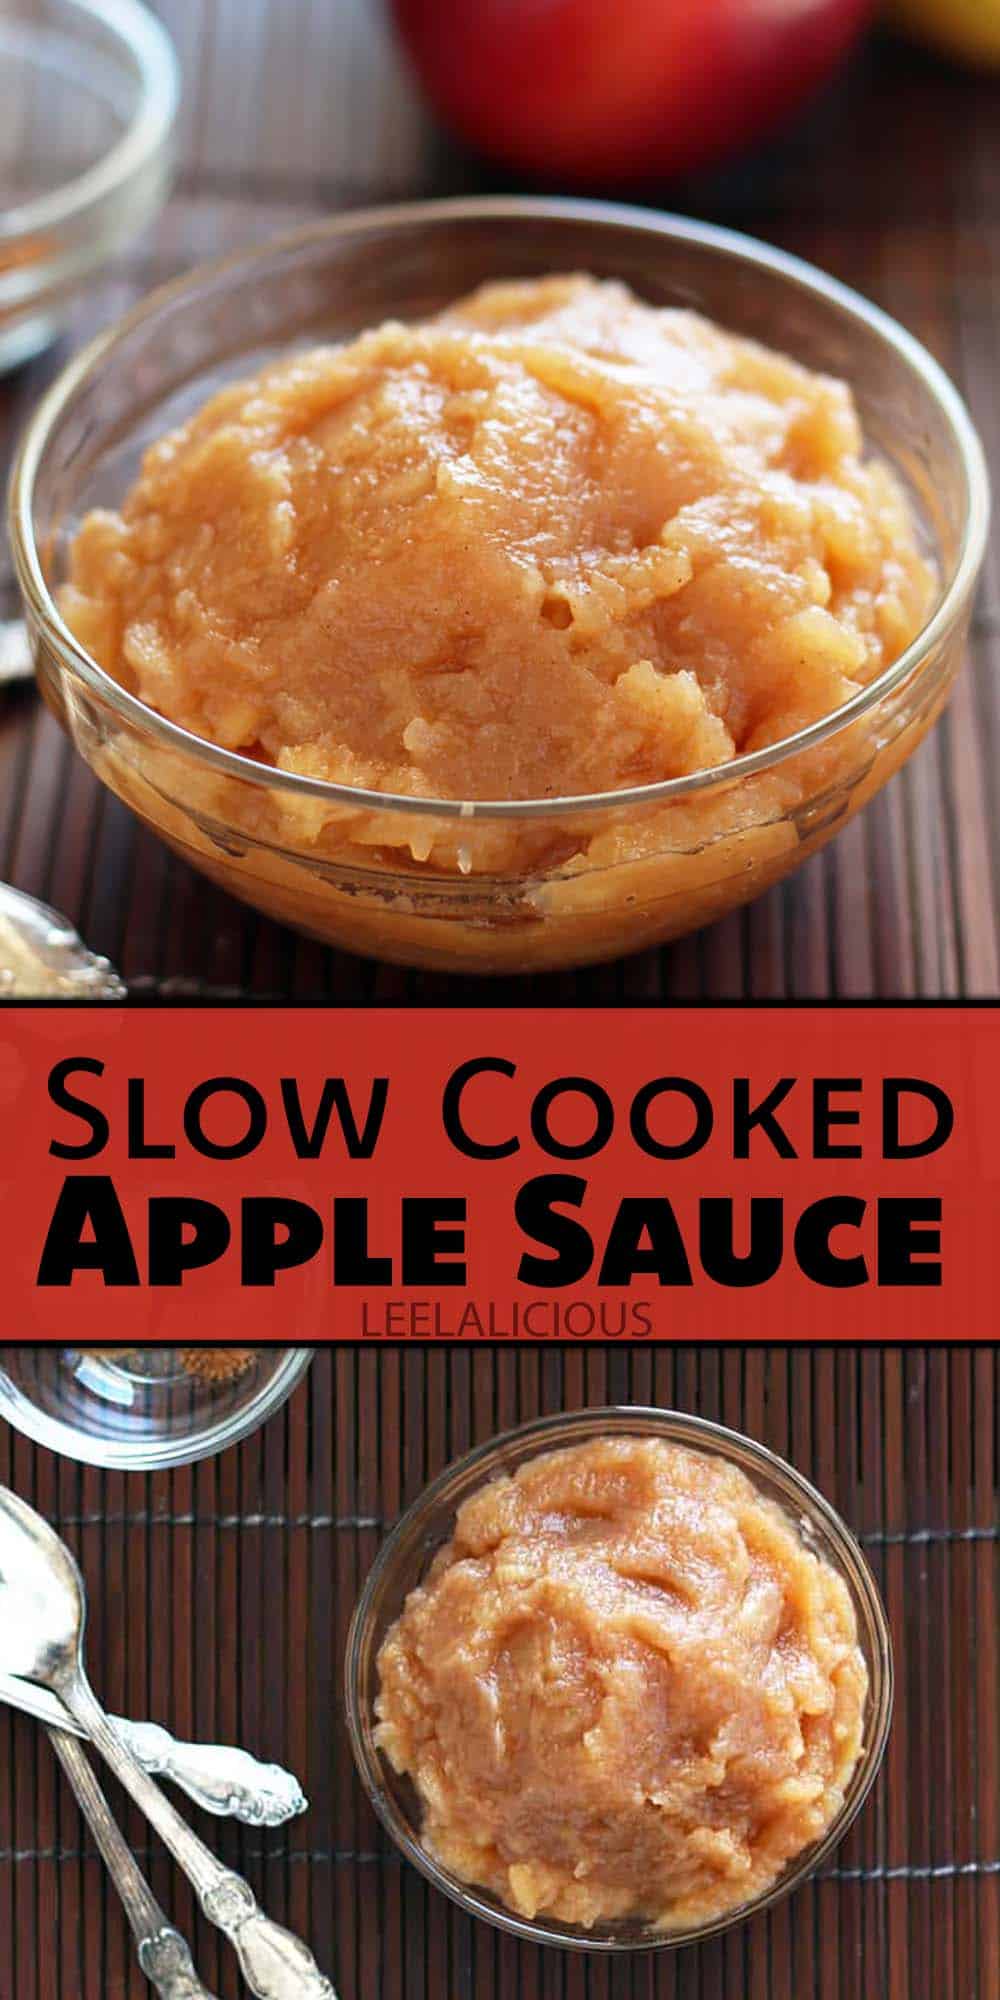 Slow Cooked Apple Sauce